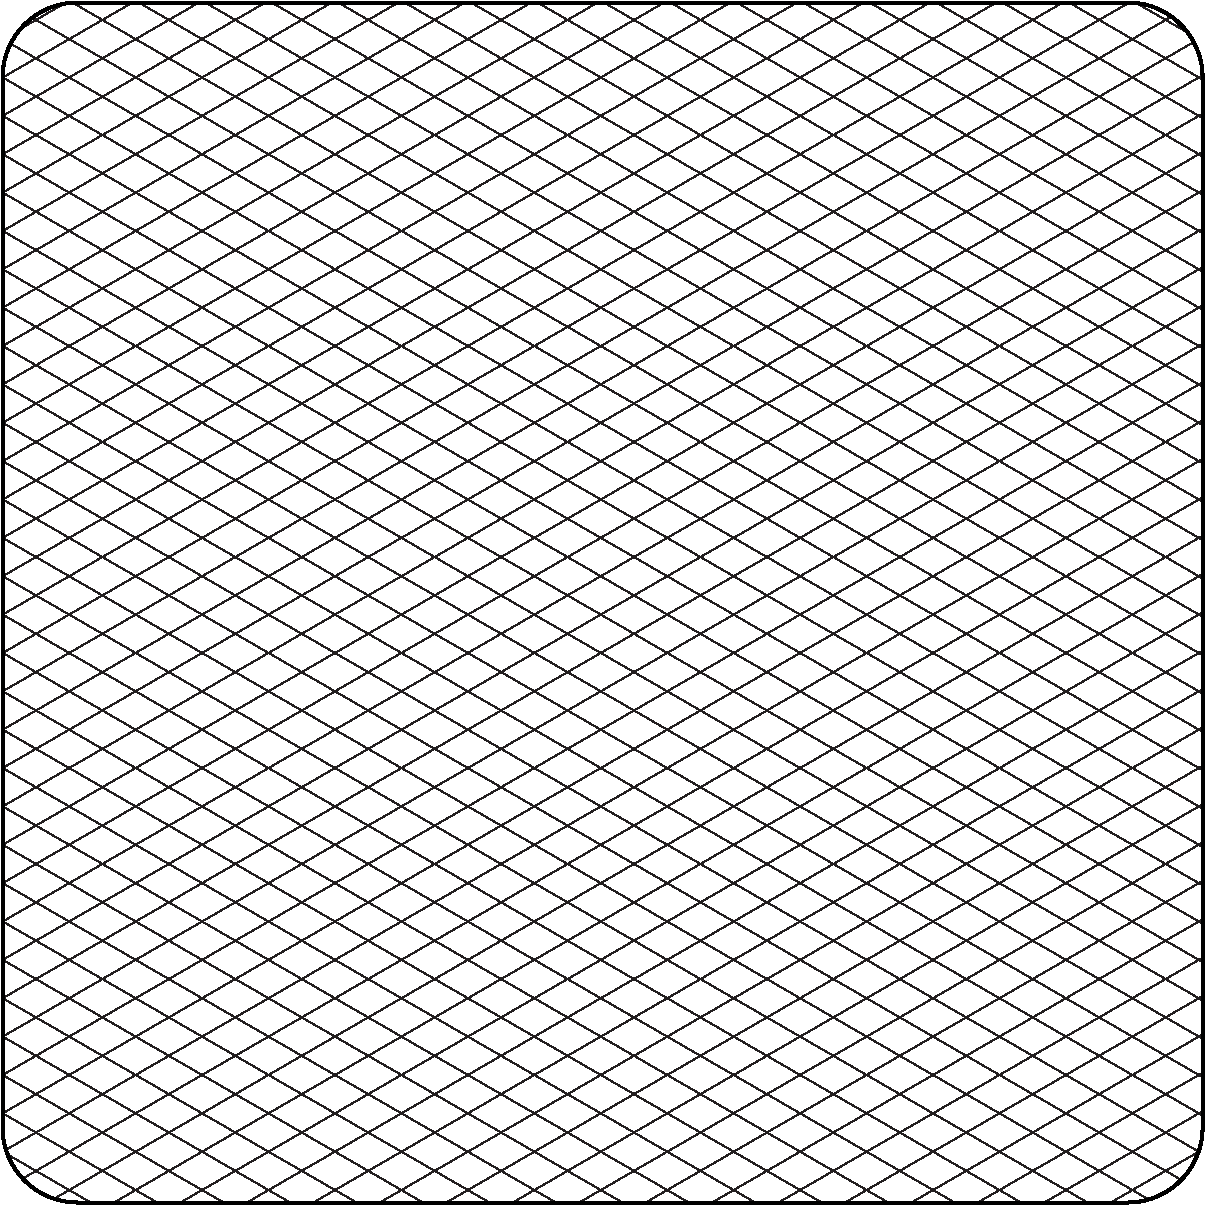 A Black Grid With White Lines